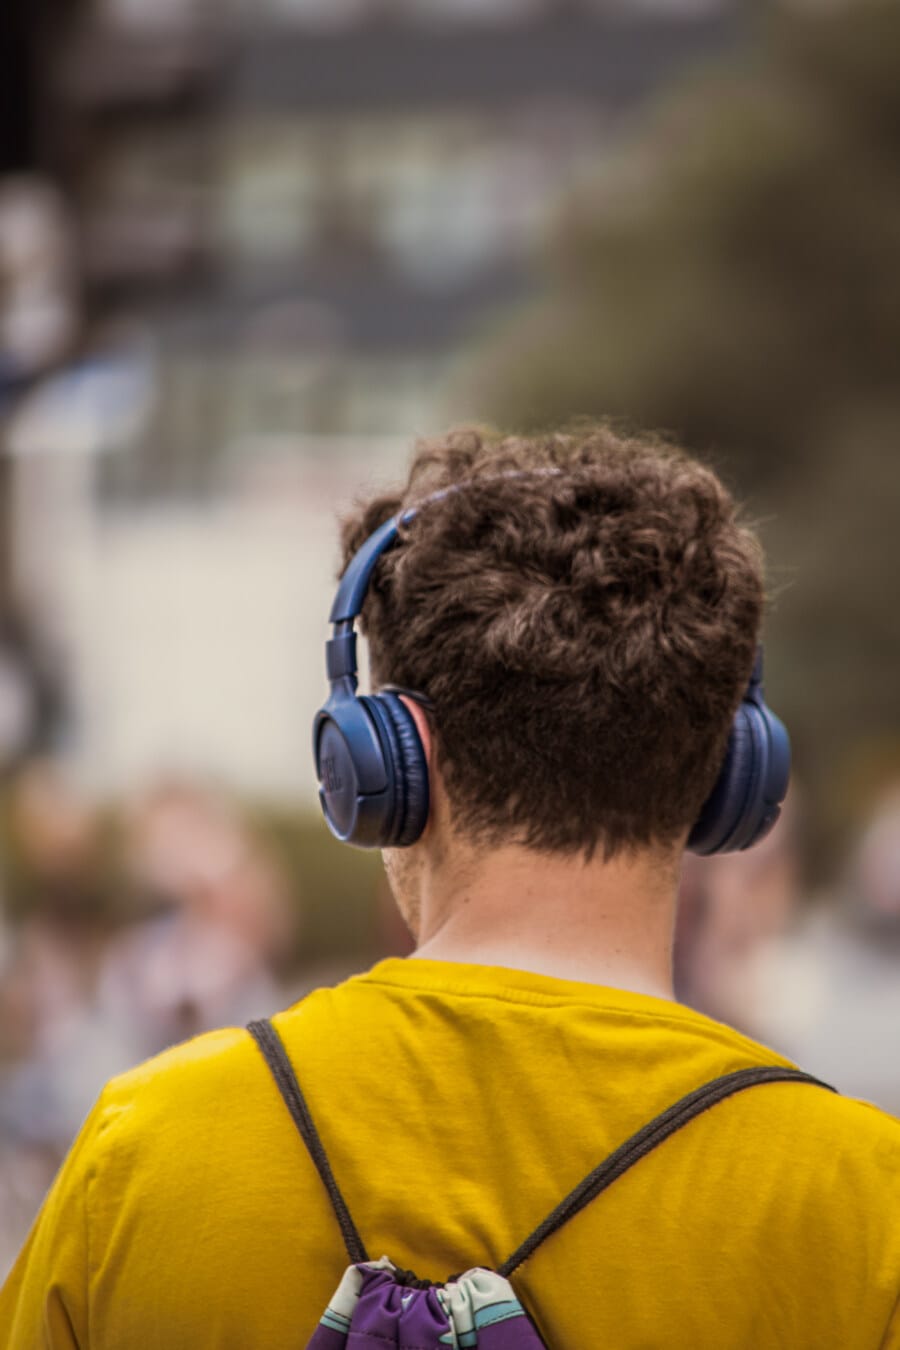 teenager, boy, wireless, hairstyle, headset, headphones, stereo, gadgets, outdoors, music